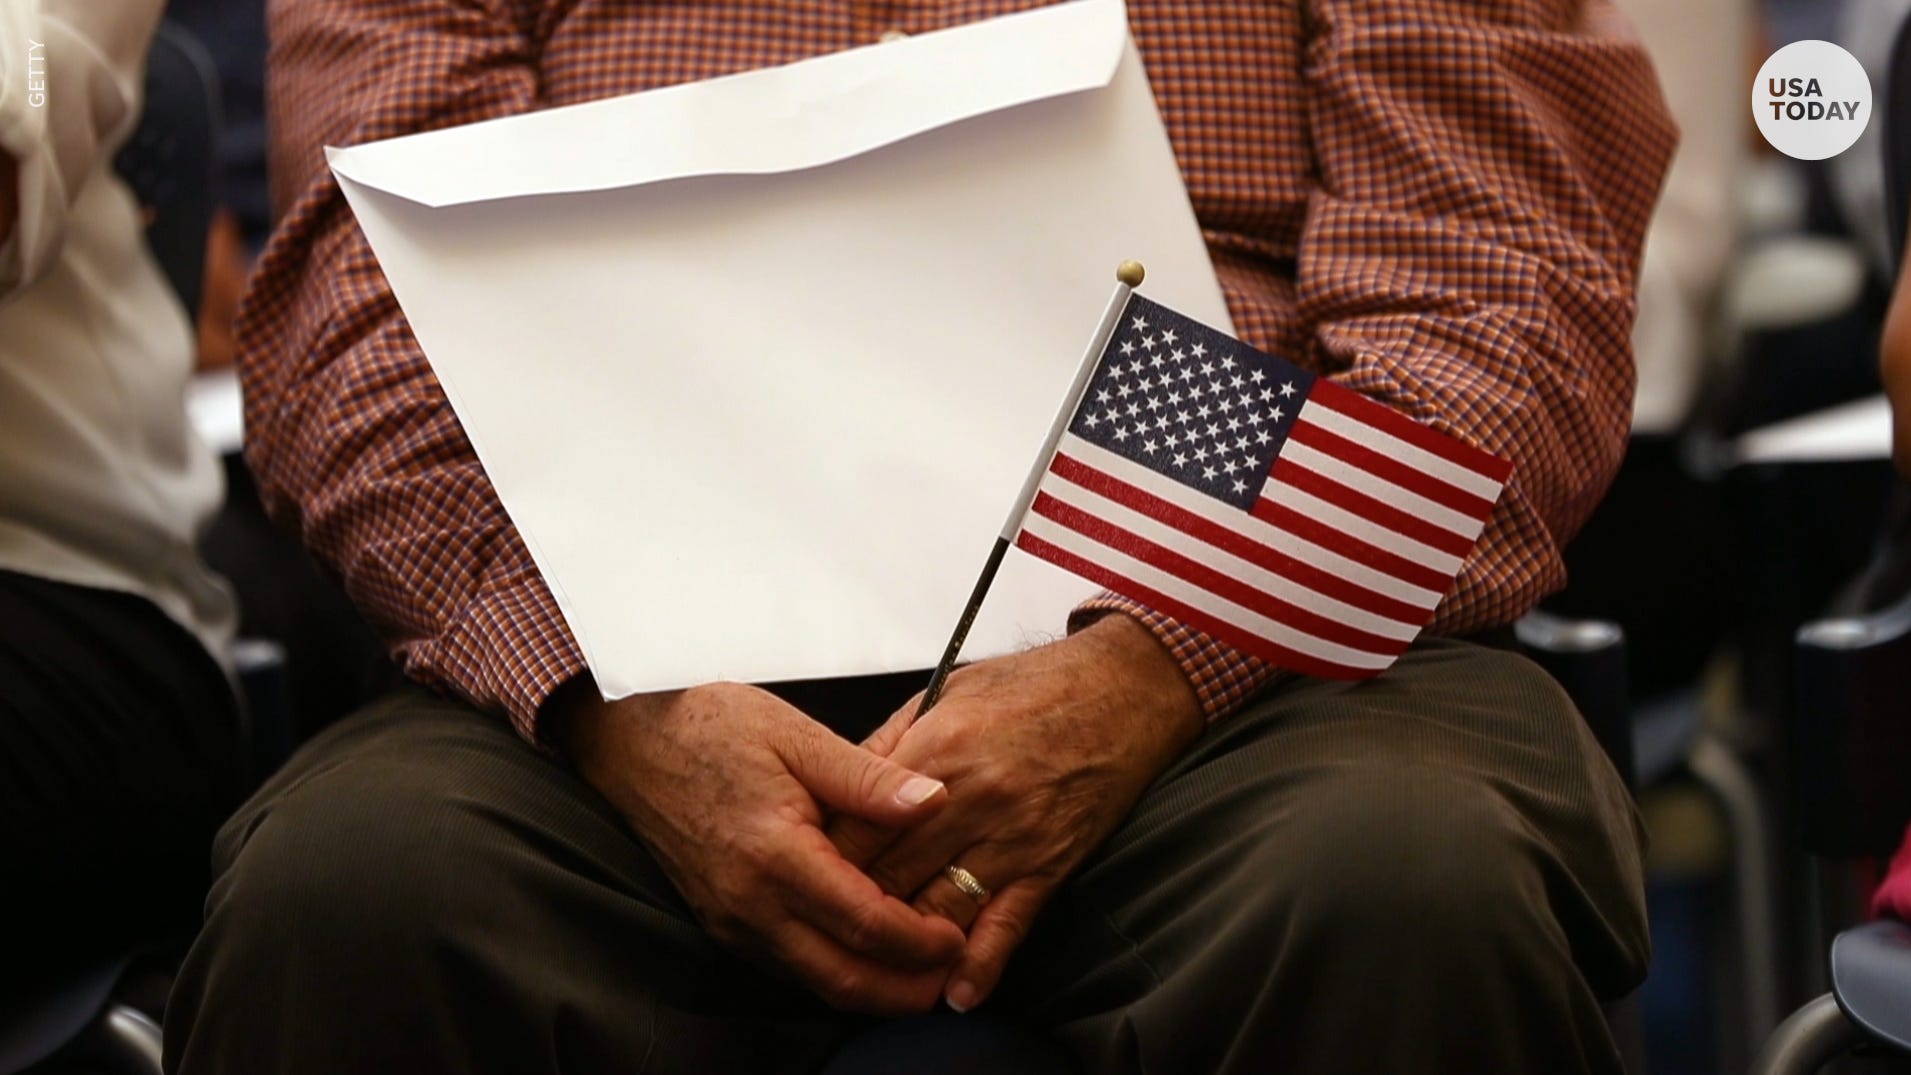 Take the test: Could you become a . citizen?